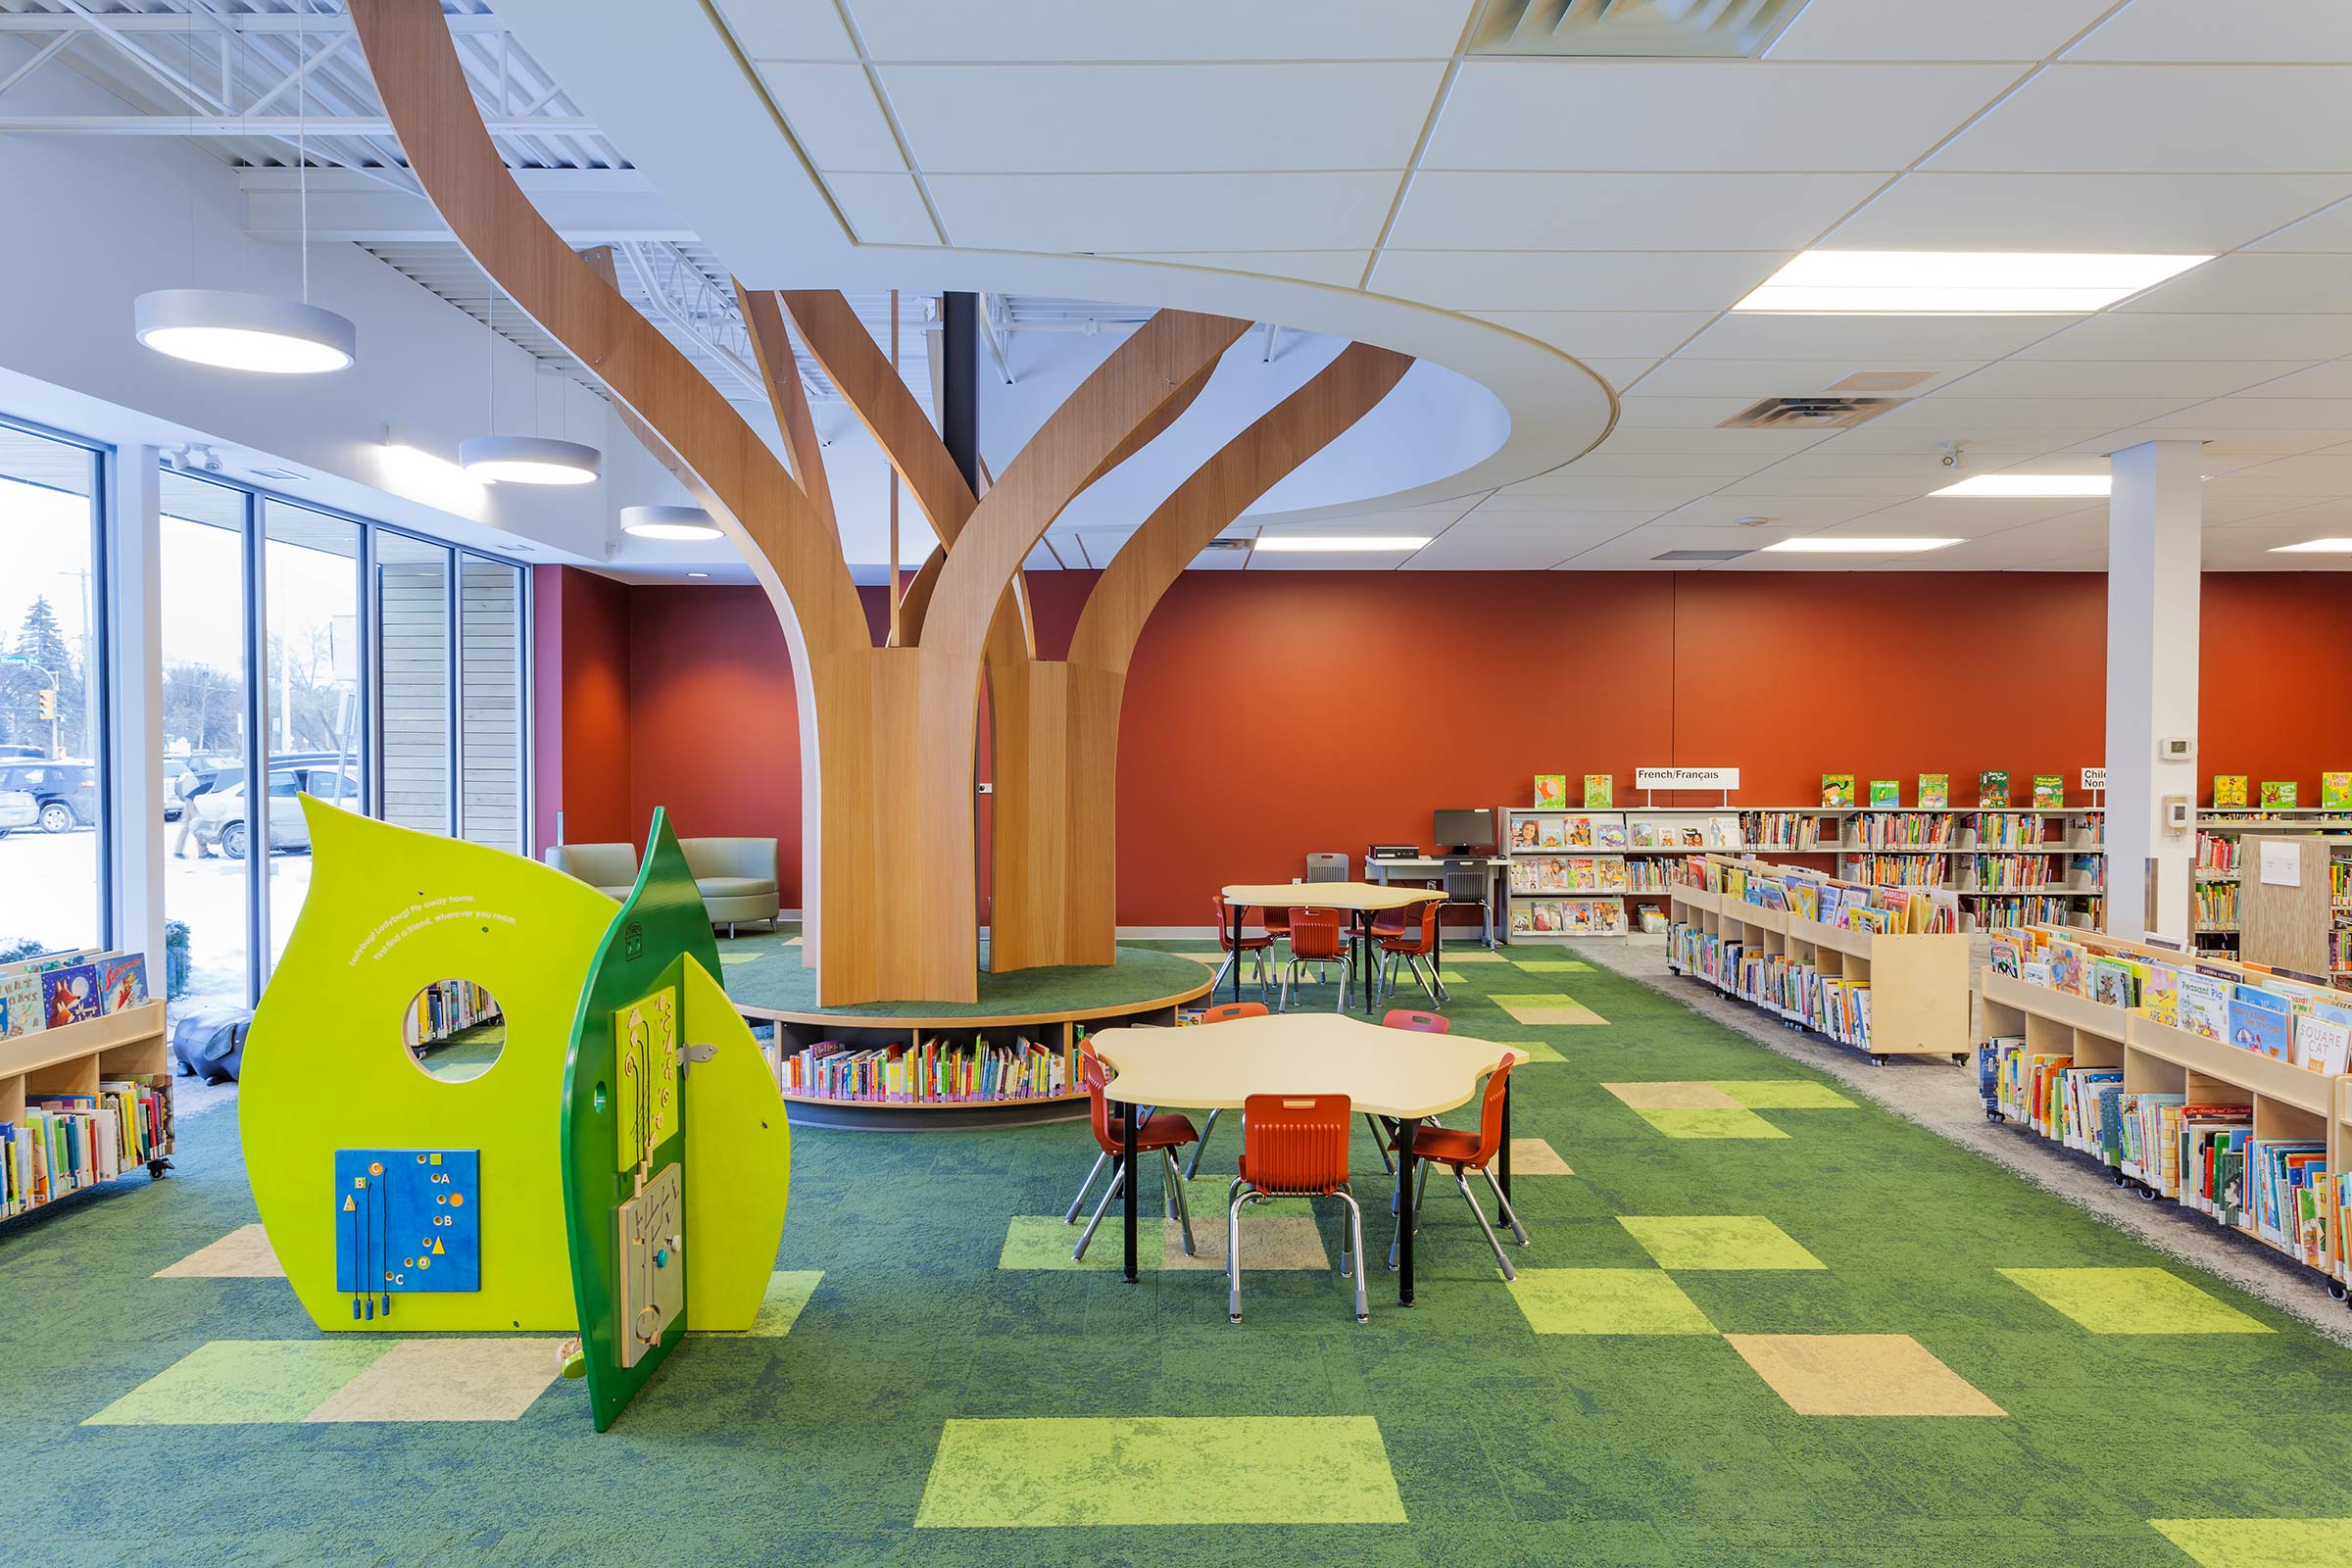 Charleswood Library Children's Area feature a large tree from the floor to ceiling.